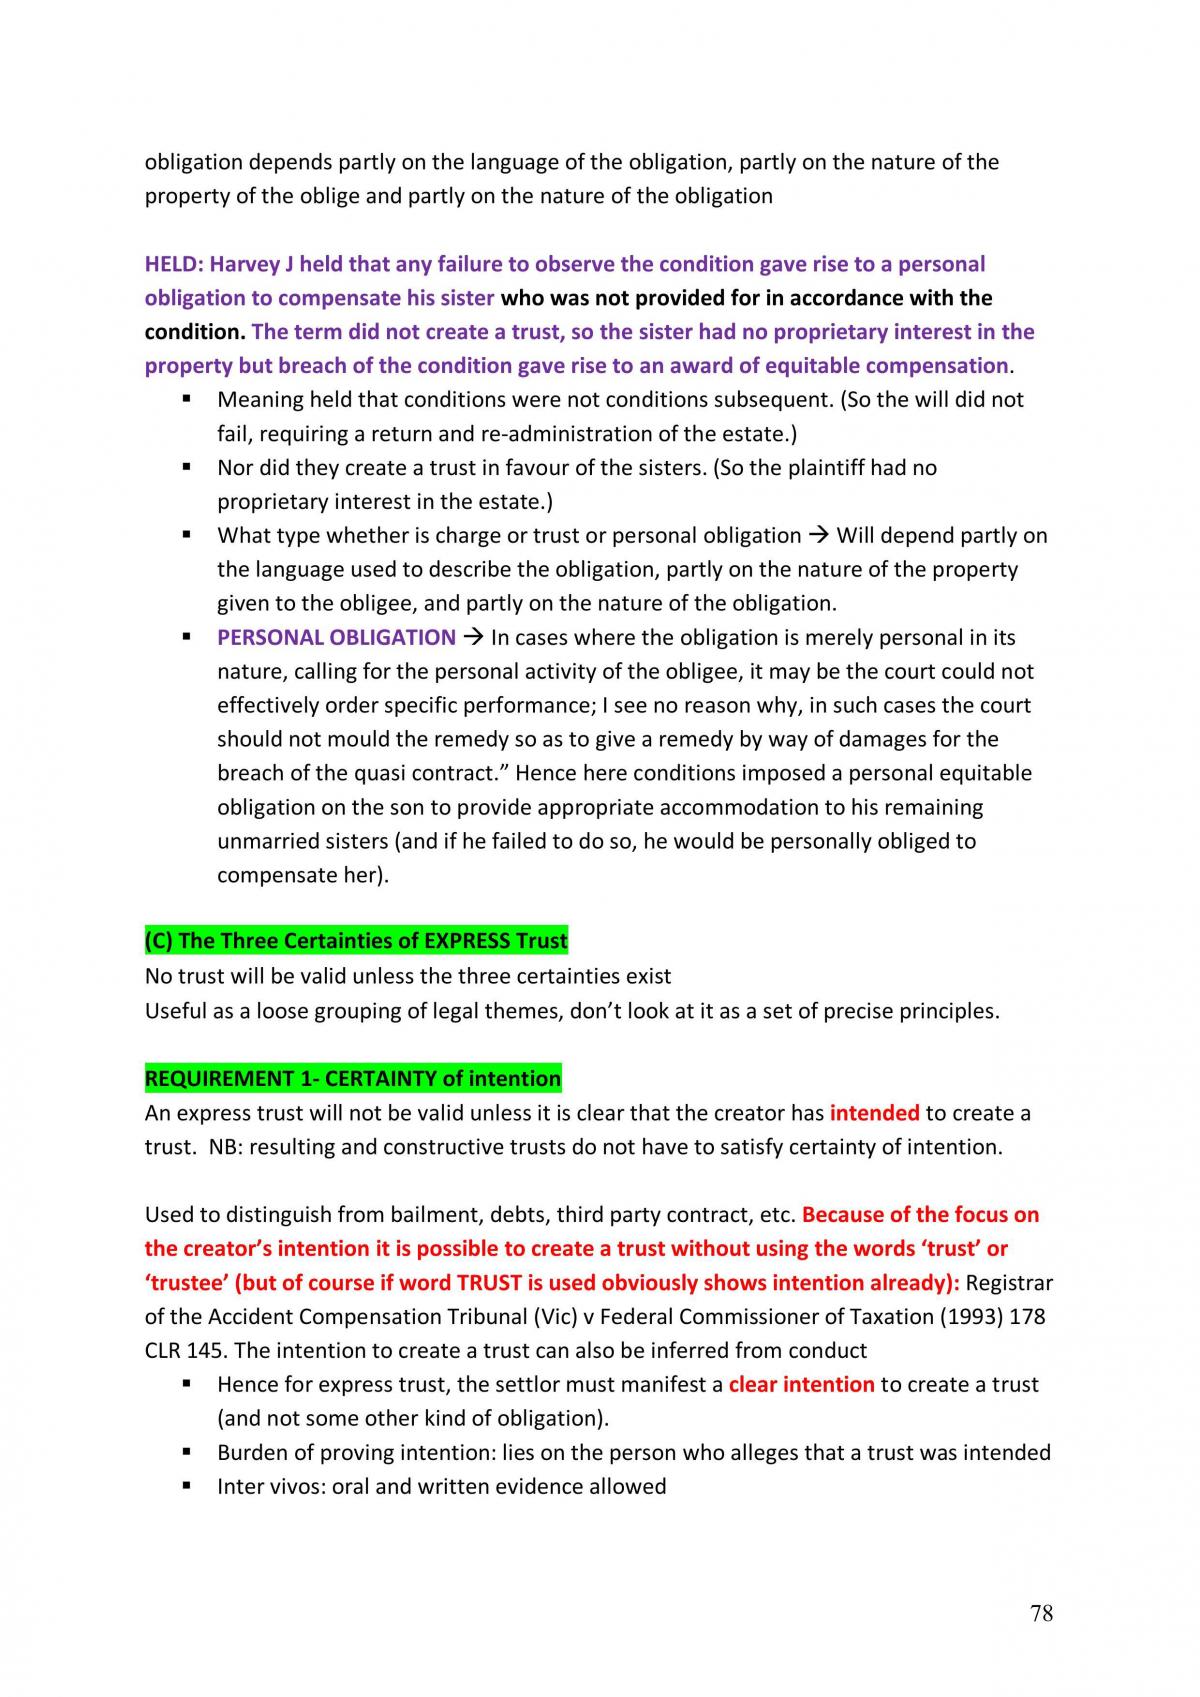 LAWS2015 Equity Complete Study Notes  - Page 78